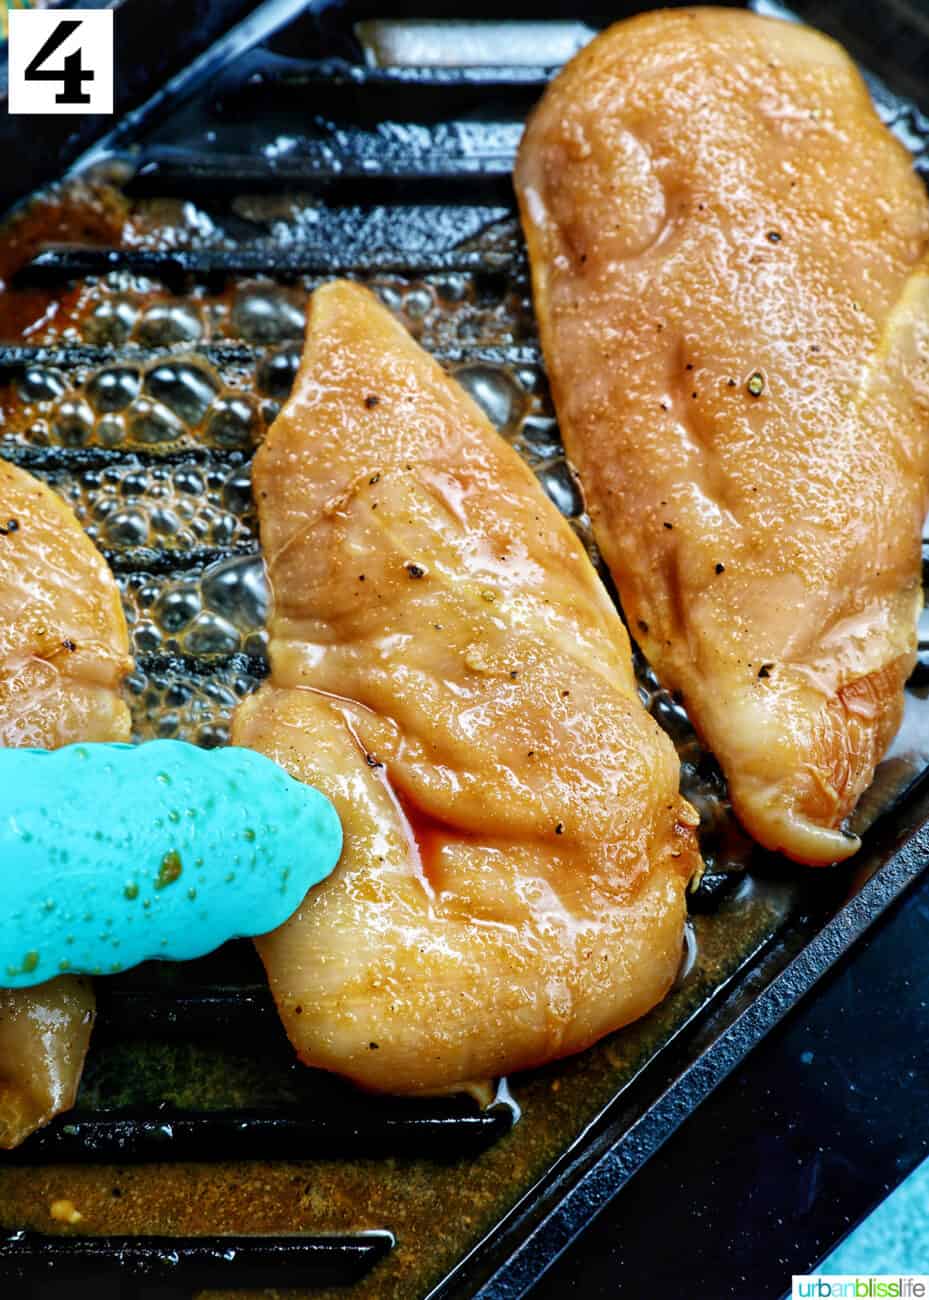 blue tongs flipping over a chicken breast next to other chicken breasts on a grill.